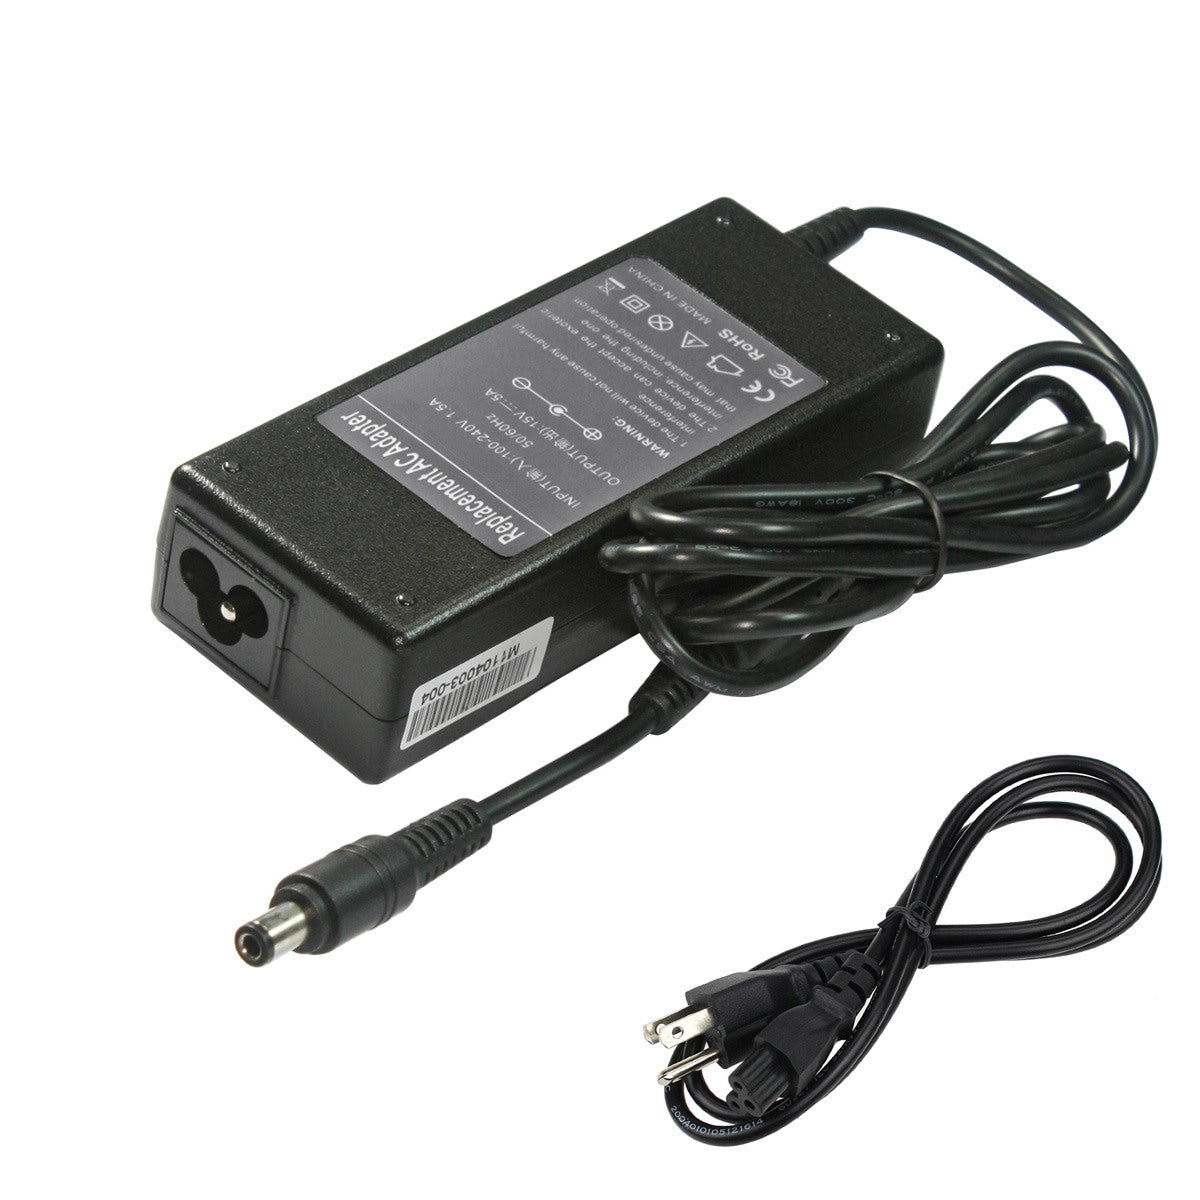 Compatible Replacement Toshiba Satellite M55-S3291 AC Adapter 75Watt 15V 5A.